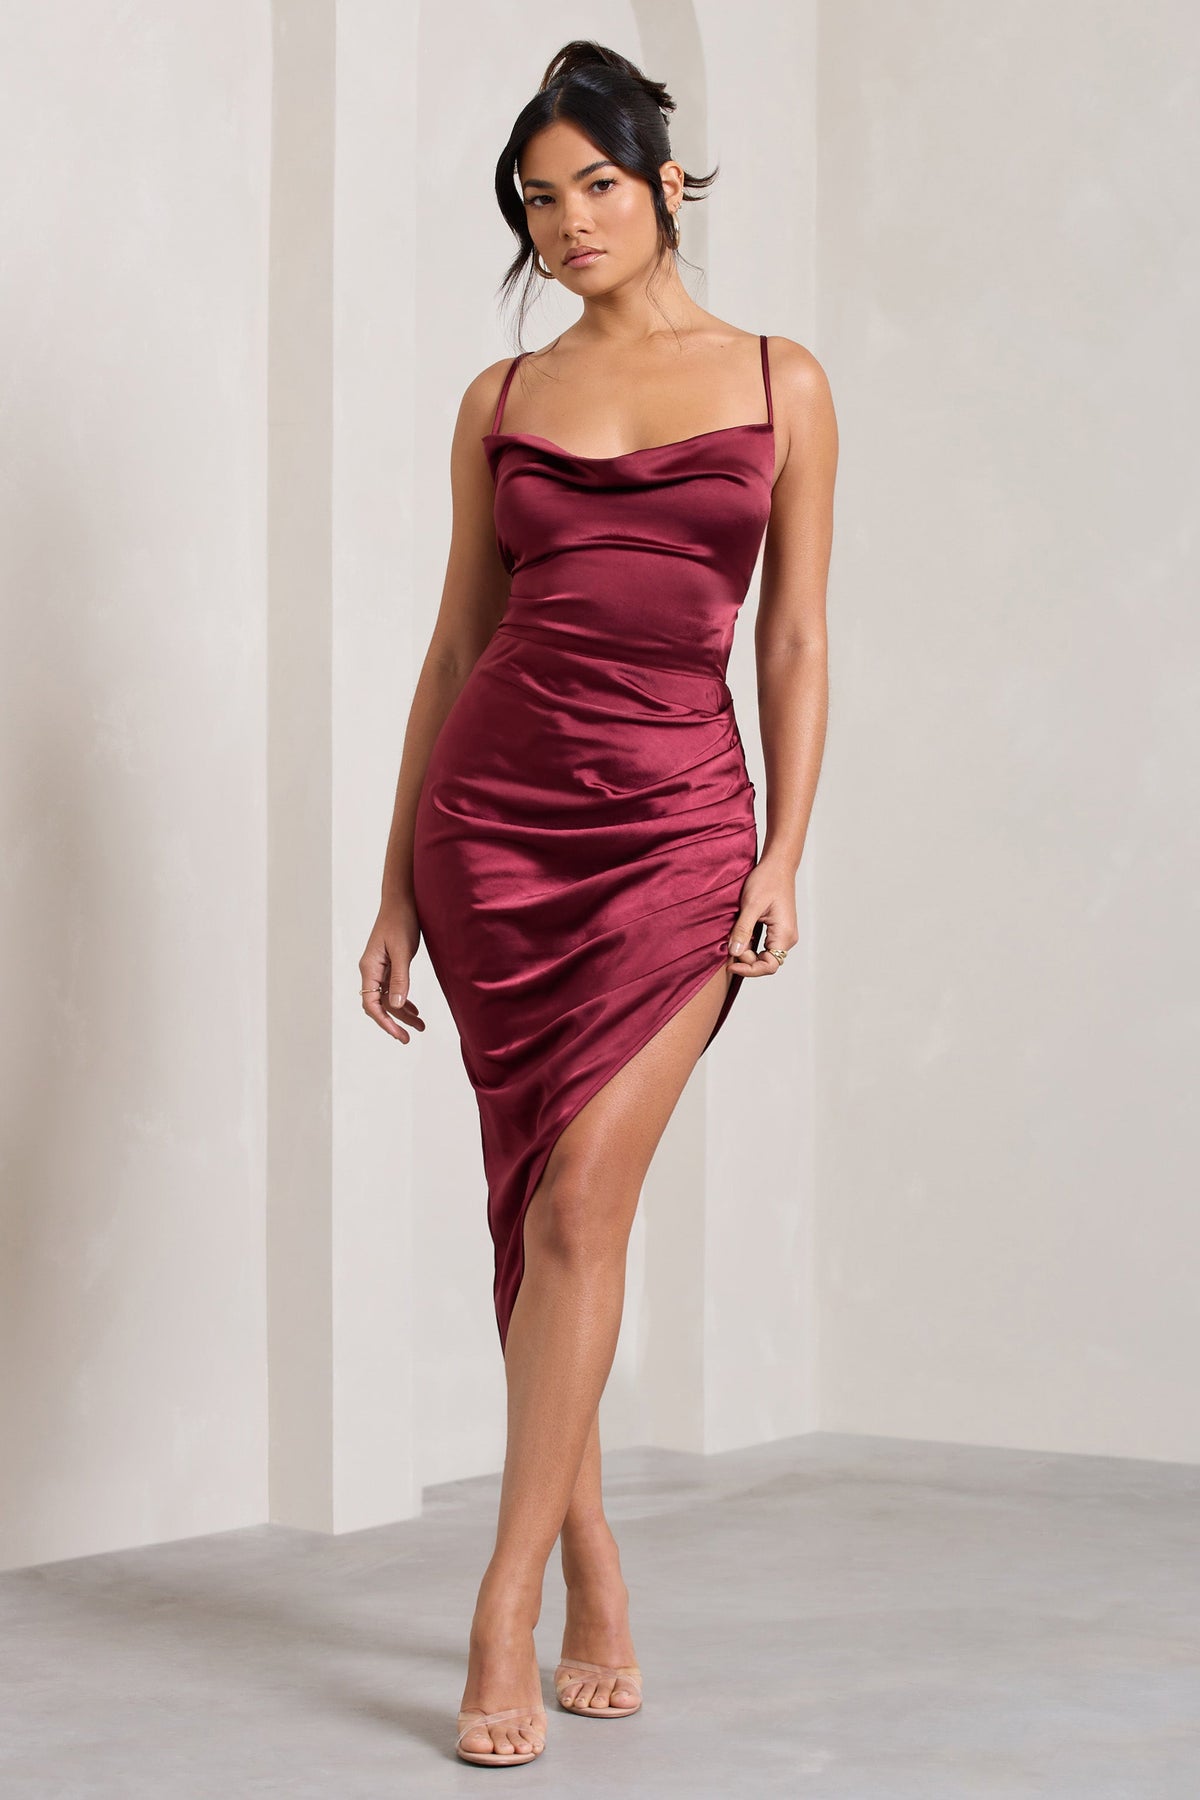 For All Occasions in Silk Cami Dress For Women